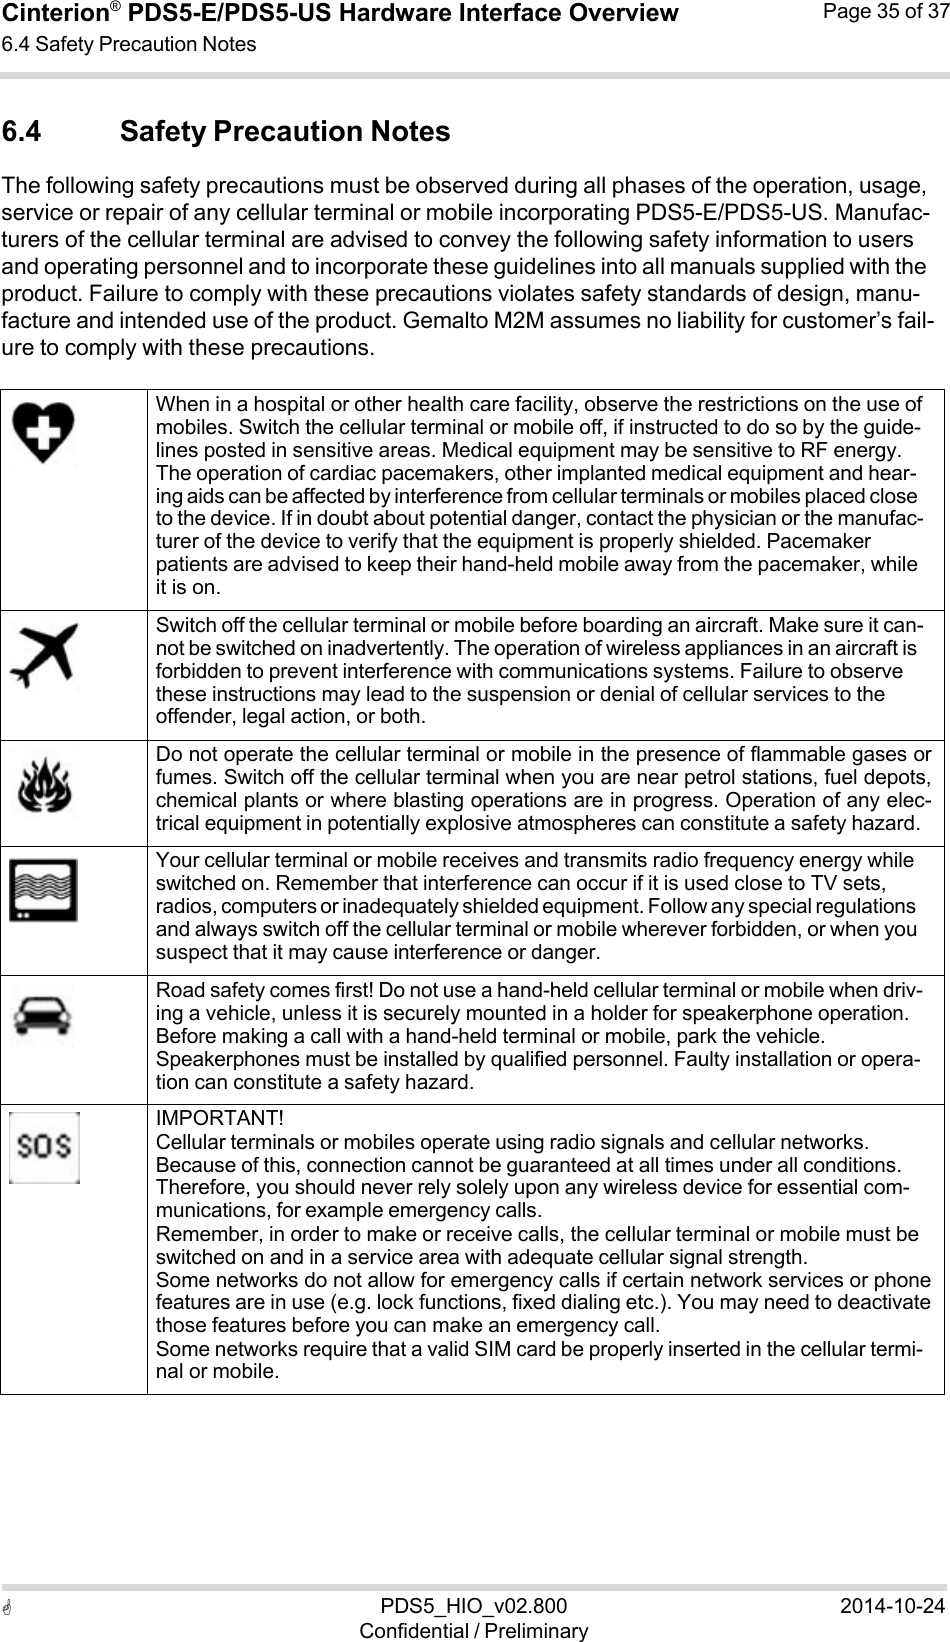  PDS5_HIO_v02.800Confidential / Preliminary2014-10-24Cinterion®  PDS5-E/PDS5-US Hardware Interface Overview6.4 Safety Precaution Notes Page 35 of 37   6.4 Safety Precaution Notes The following safety precautions must be observed during all phases of the operation, usage, service or repair of any cellular terminal or mobile incorporating PDS5-E/PDS5-US. Manufac- turers of the cellular terminal are advised to convey the following safety information to users and operating personnel and to incorporate these guidelines into all manuals supplied with the product. Failure to comply with these precautions violates safety standards of design, manu- facture and intended use of the product. Gemalto M2M assumes no liability for customer’s fail- ure to comply with these precautions.         When in a hospital or other health care facility, observe the restrictions on the use of mobiles. Switch the cellular terminal or mobile off, if instructed to do so by the guide- lines posted in sensitive areas. Medical equipment may be sensitive to RF energy. The operation of cardiac pacemakers, other implanted medical equipment and hear- ing aids can be affected by interference from cellular terminals or mobiles placed close to the device. If in doubt about potential danger, contact the physician or the manufac- turer of the device to verify that the equipment is properly shielded. Pacemaker patients are advised to keep their hand-held mobile away from the pacemaker, while it is on.     Switch off the cellular terminal or mobile before boarding an aircraft. Make sure it can- not be switched on inadvertently. The operation of wireless appliances in an aircraft is forbidden to prevent interference with communications systems. Failure to observe these instructions may lead to the suspension or denial of cellular services to the offender, legal action, or both.    Do not operate the cellular terminal or mobile in the presence of flammable gases orfumes. Switch off the cellular terminal when you are near petrol stations, fuel depots,chemical plants or where blasting operations are in progress. Operation of any elec-trical equipment in potentially explosive atmospheres can constitute a safety hazard.     Your cellular terminal or mobile receives and transmits radio frequency energy while switched on. Remember that interference can occur if it is used close to TV sets, radios, computers or inadequately shielded equipment. Follow any special regulations and always switch off the cellular terminal or mobile wherever forbidden, or when you suspect that it may cause interference or danger.     Road safety comes first! Do not use a hand-held cellular terminal or mobile when driv- ing a vehicle, unless it is securely mounted in a holder for speakerphone operation. Before making a call with a hand-held terminal or mobile, park the vehicle. Speakerphones must be installed by qualified personnel. Faulty installation or opera- tion can constitute a safety hazard.           IMPORTANT! Cellular terminals or mobiles operate using radio signals and cellular networks. Because of this, connection cannot be guaranteed at all times under all conditions. Therefore, you should never rely solely upon any wireless device for essential com- munications, for example emergency calls. Remember, in order to make or receive calls, the cellular terminal or mobile must be switched on and in a service area with adequate cellular signal strength. Some networks do not allow for emergency calls if certain network services or phonefeatures are in use (e.g. lock functions, fixed dialing etc.). You may need to deactivatethose features before you can make an emergency call. Some networks require that a valid SIM card be properly inserted in the cellular termi- nal or mobile. 